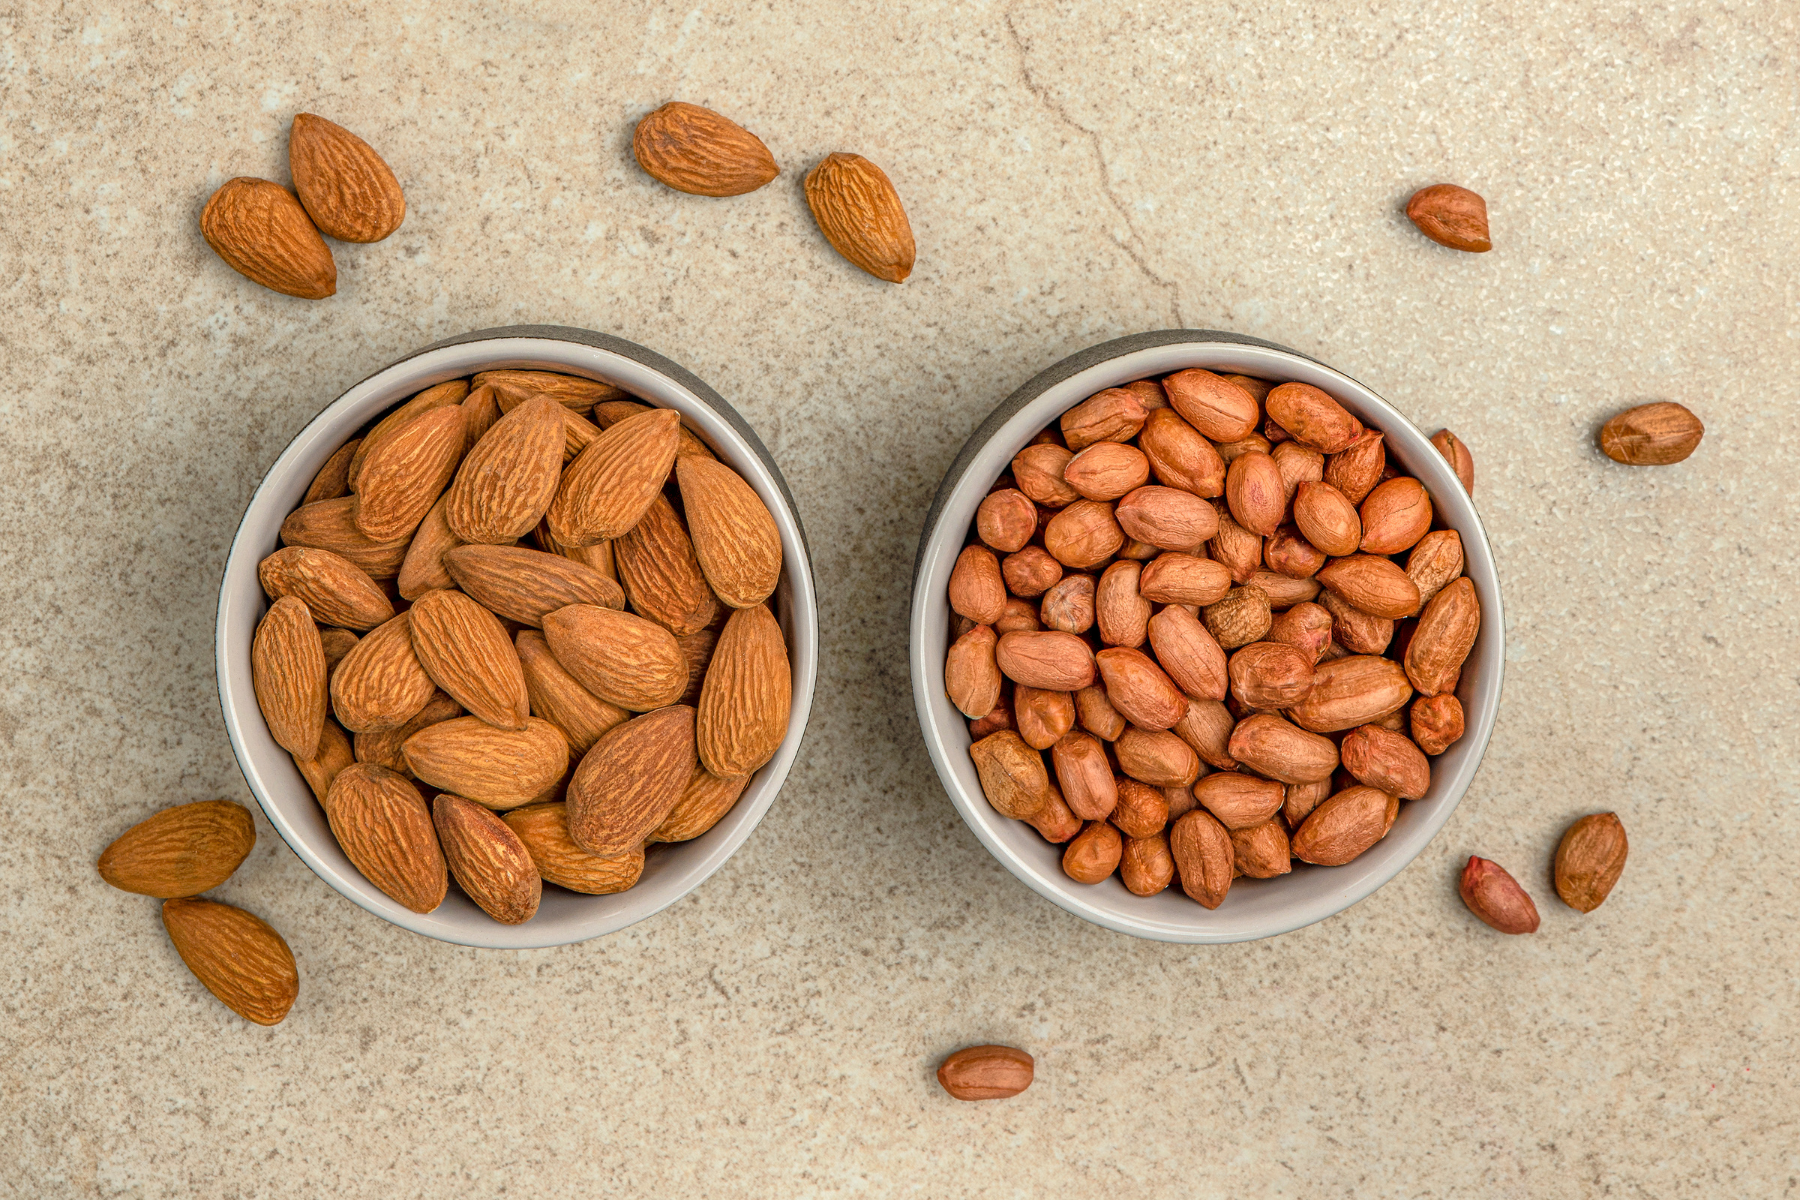 Two bowls on a kitchen table, one filled with raw almonds and one with raw peanuts.